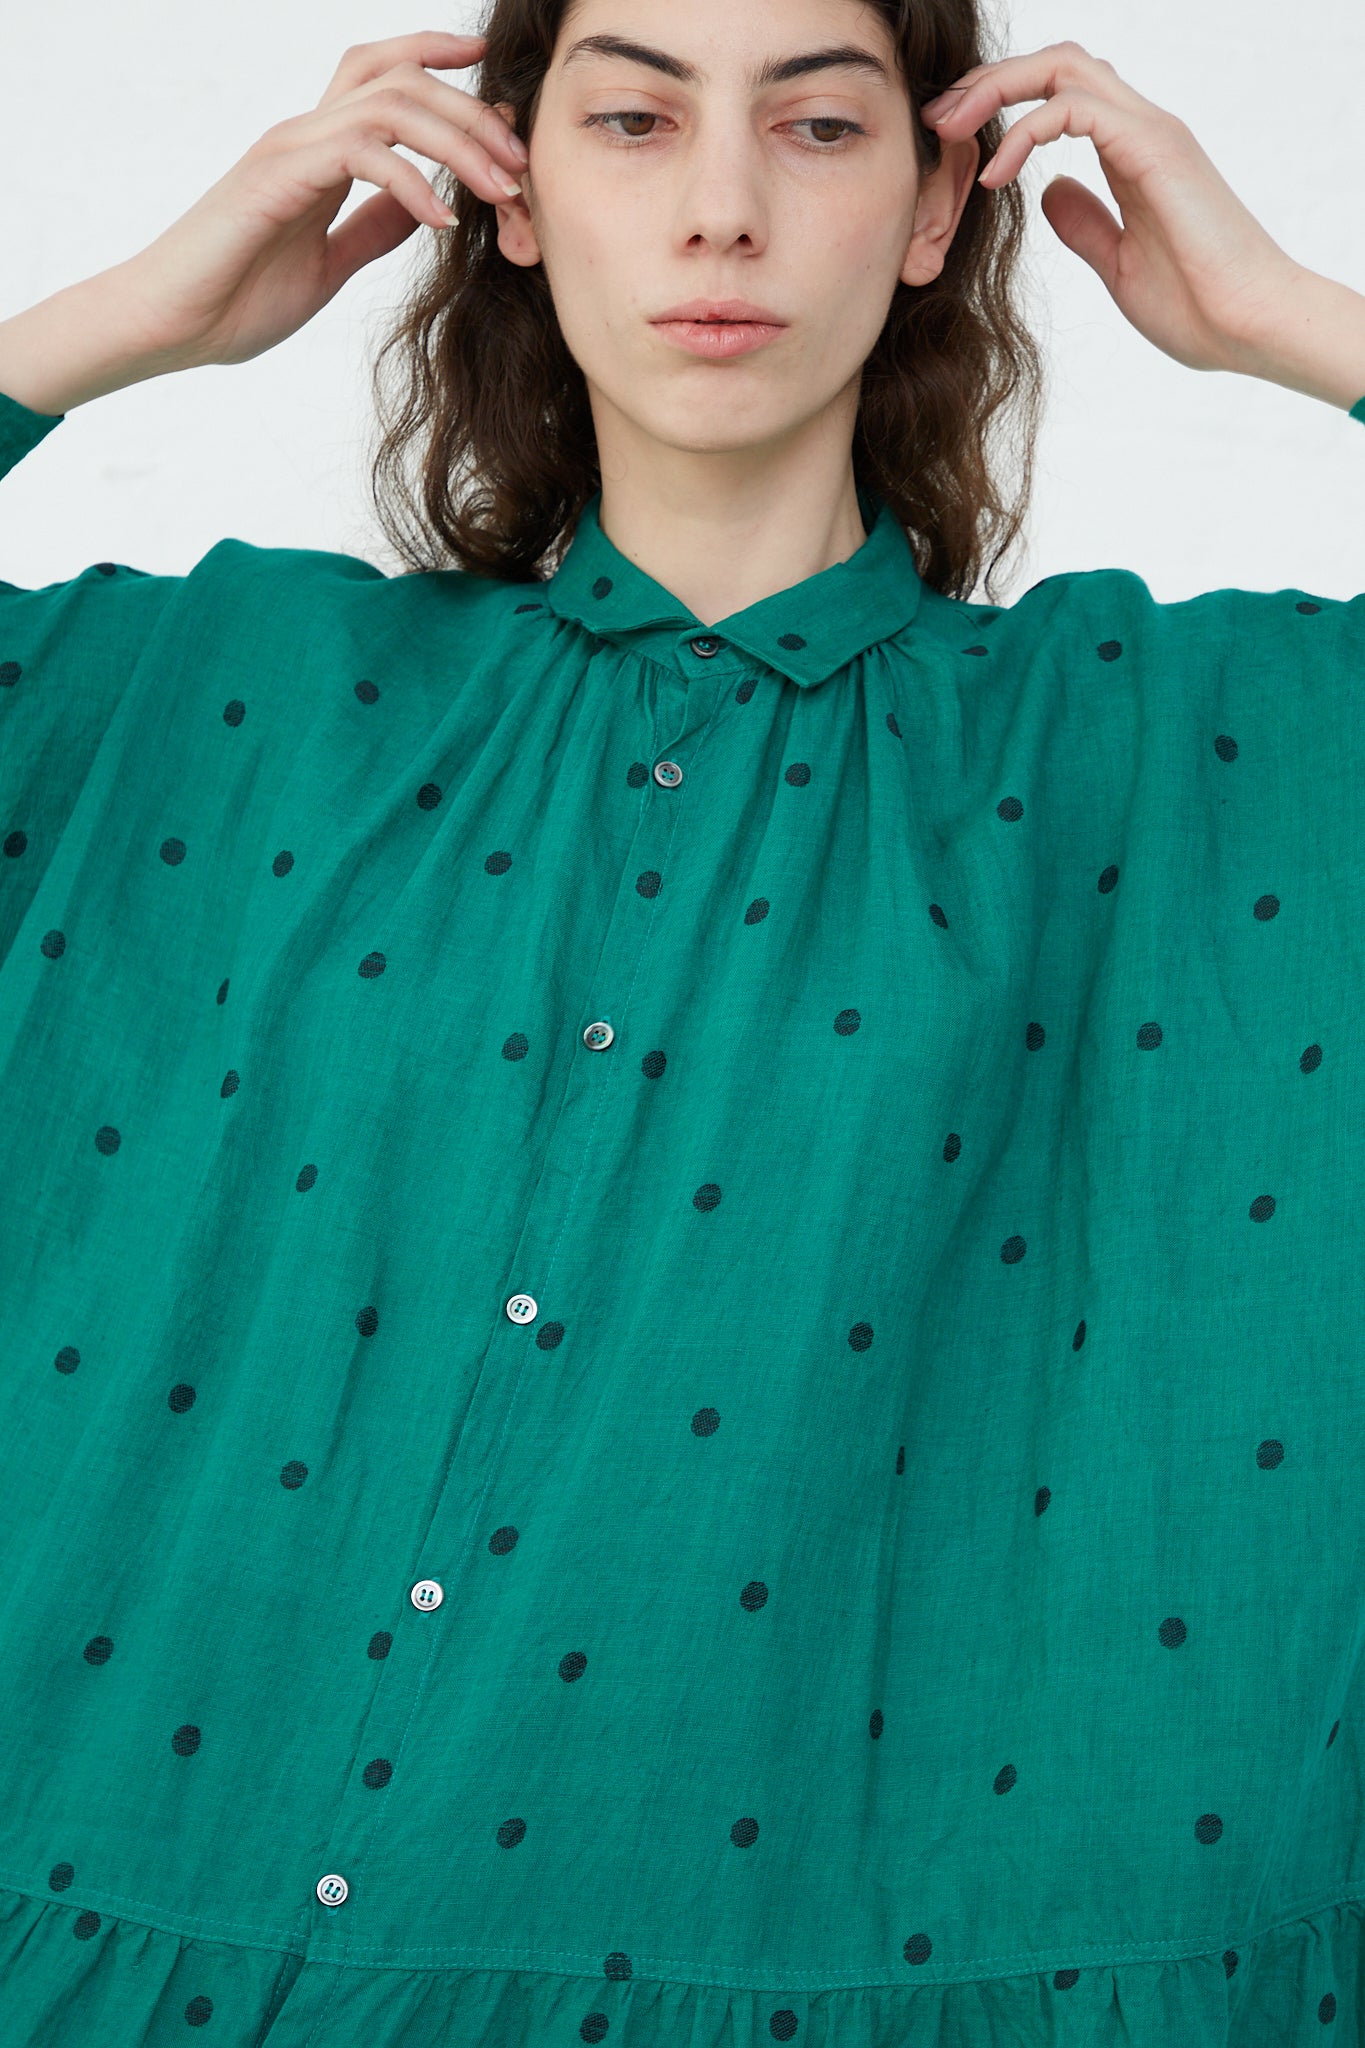 The model is wearing a Linen Dot Dress in Green and Black by Ichi Antiquités. Up close view.